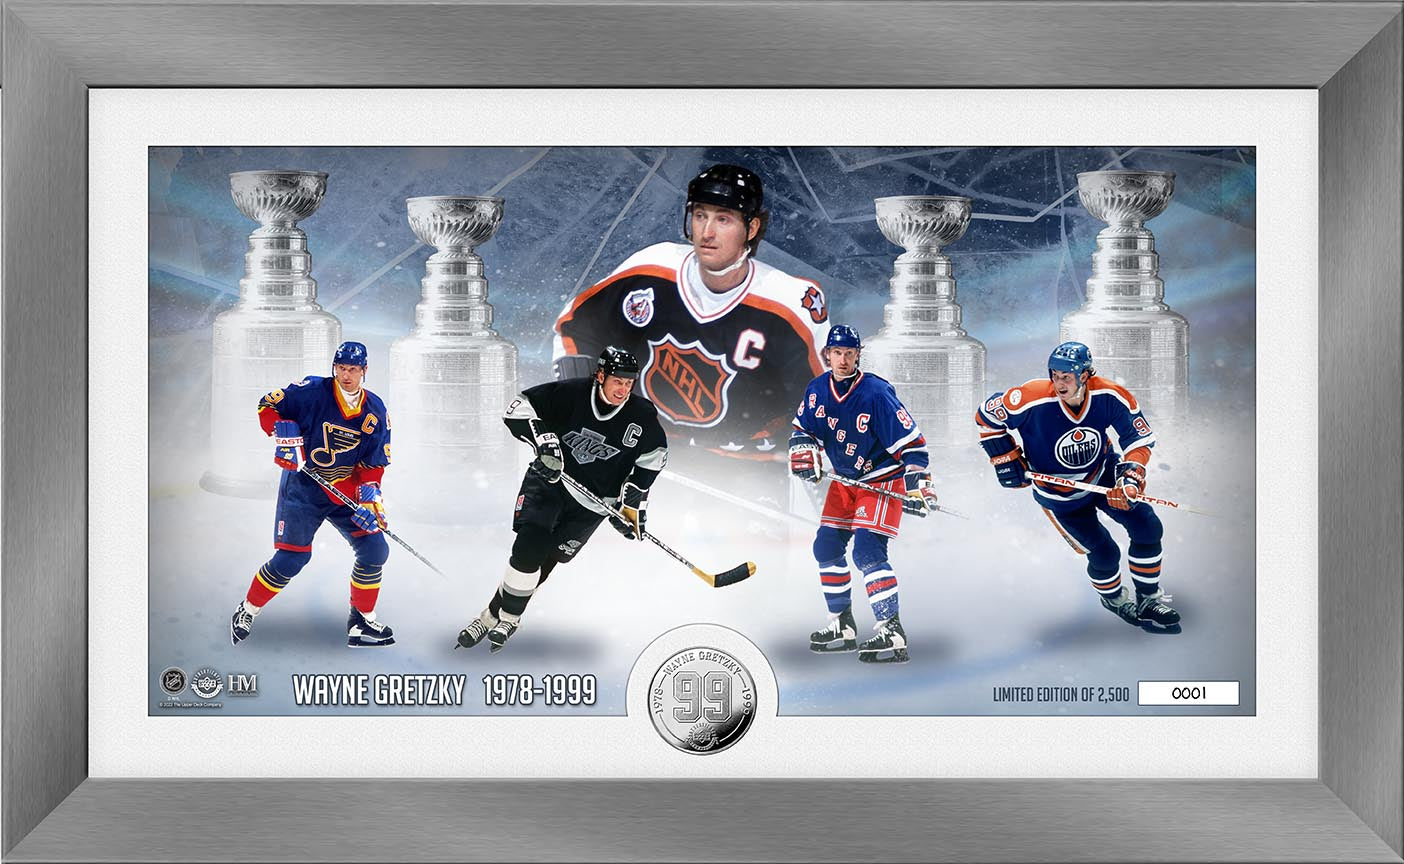 Wayne Gretzky The Great One Silver Coin Pano Photo Mint